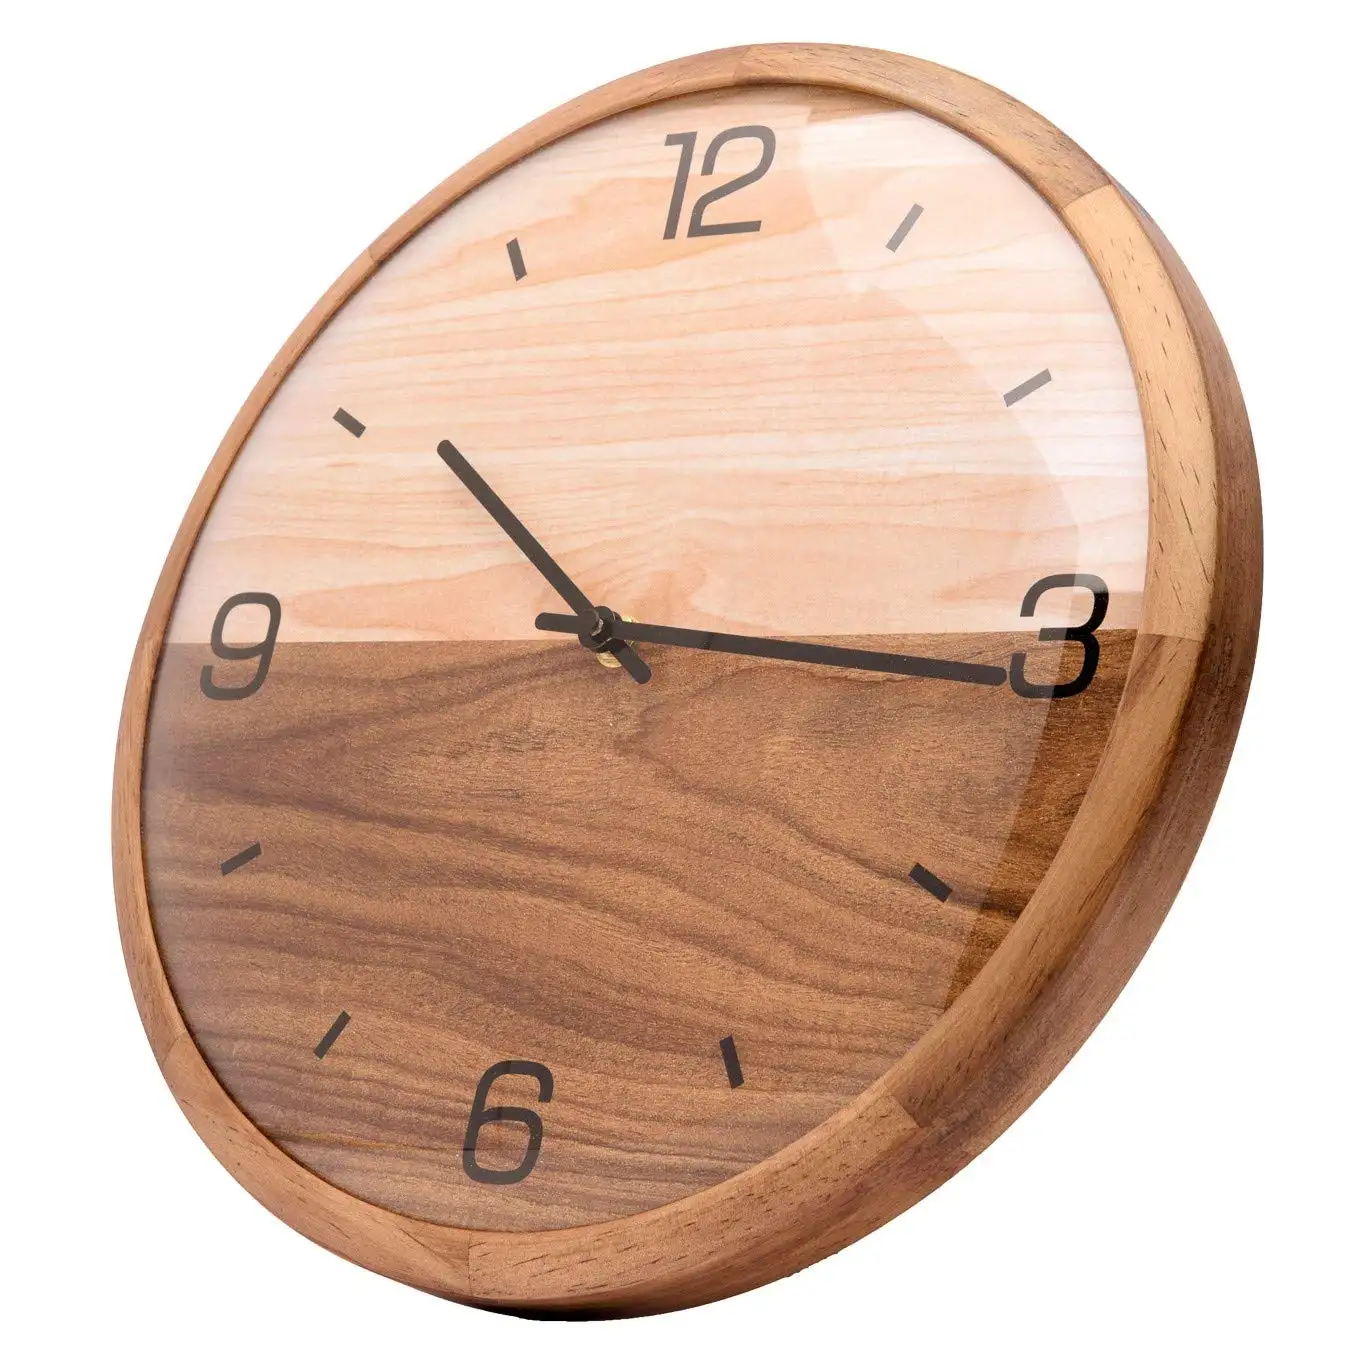 12" Northern Europe Decorative Wooden Wall Clock with Annual Rings for Home Office